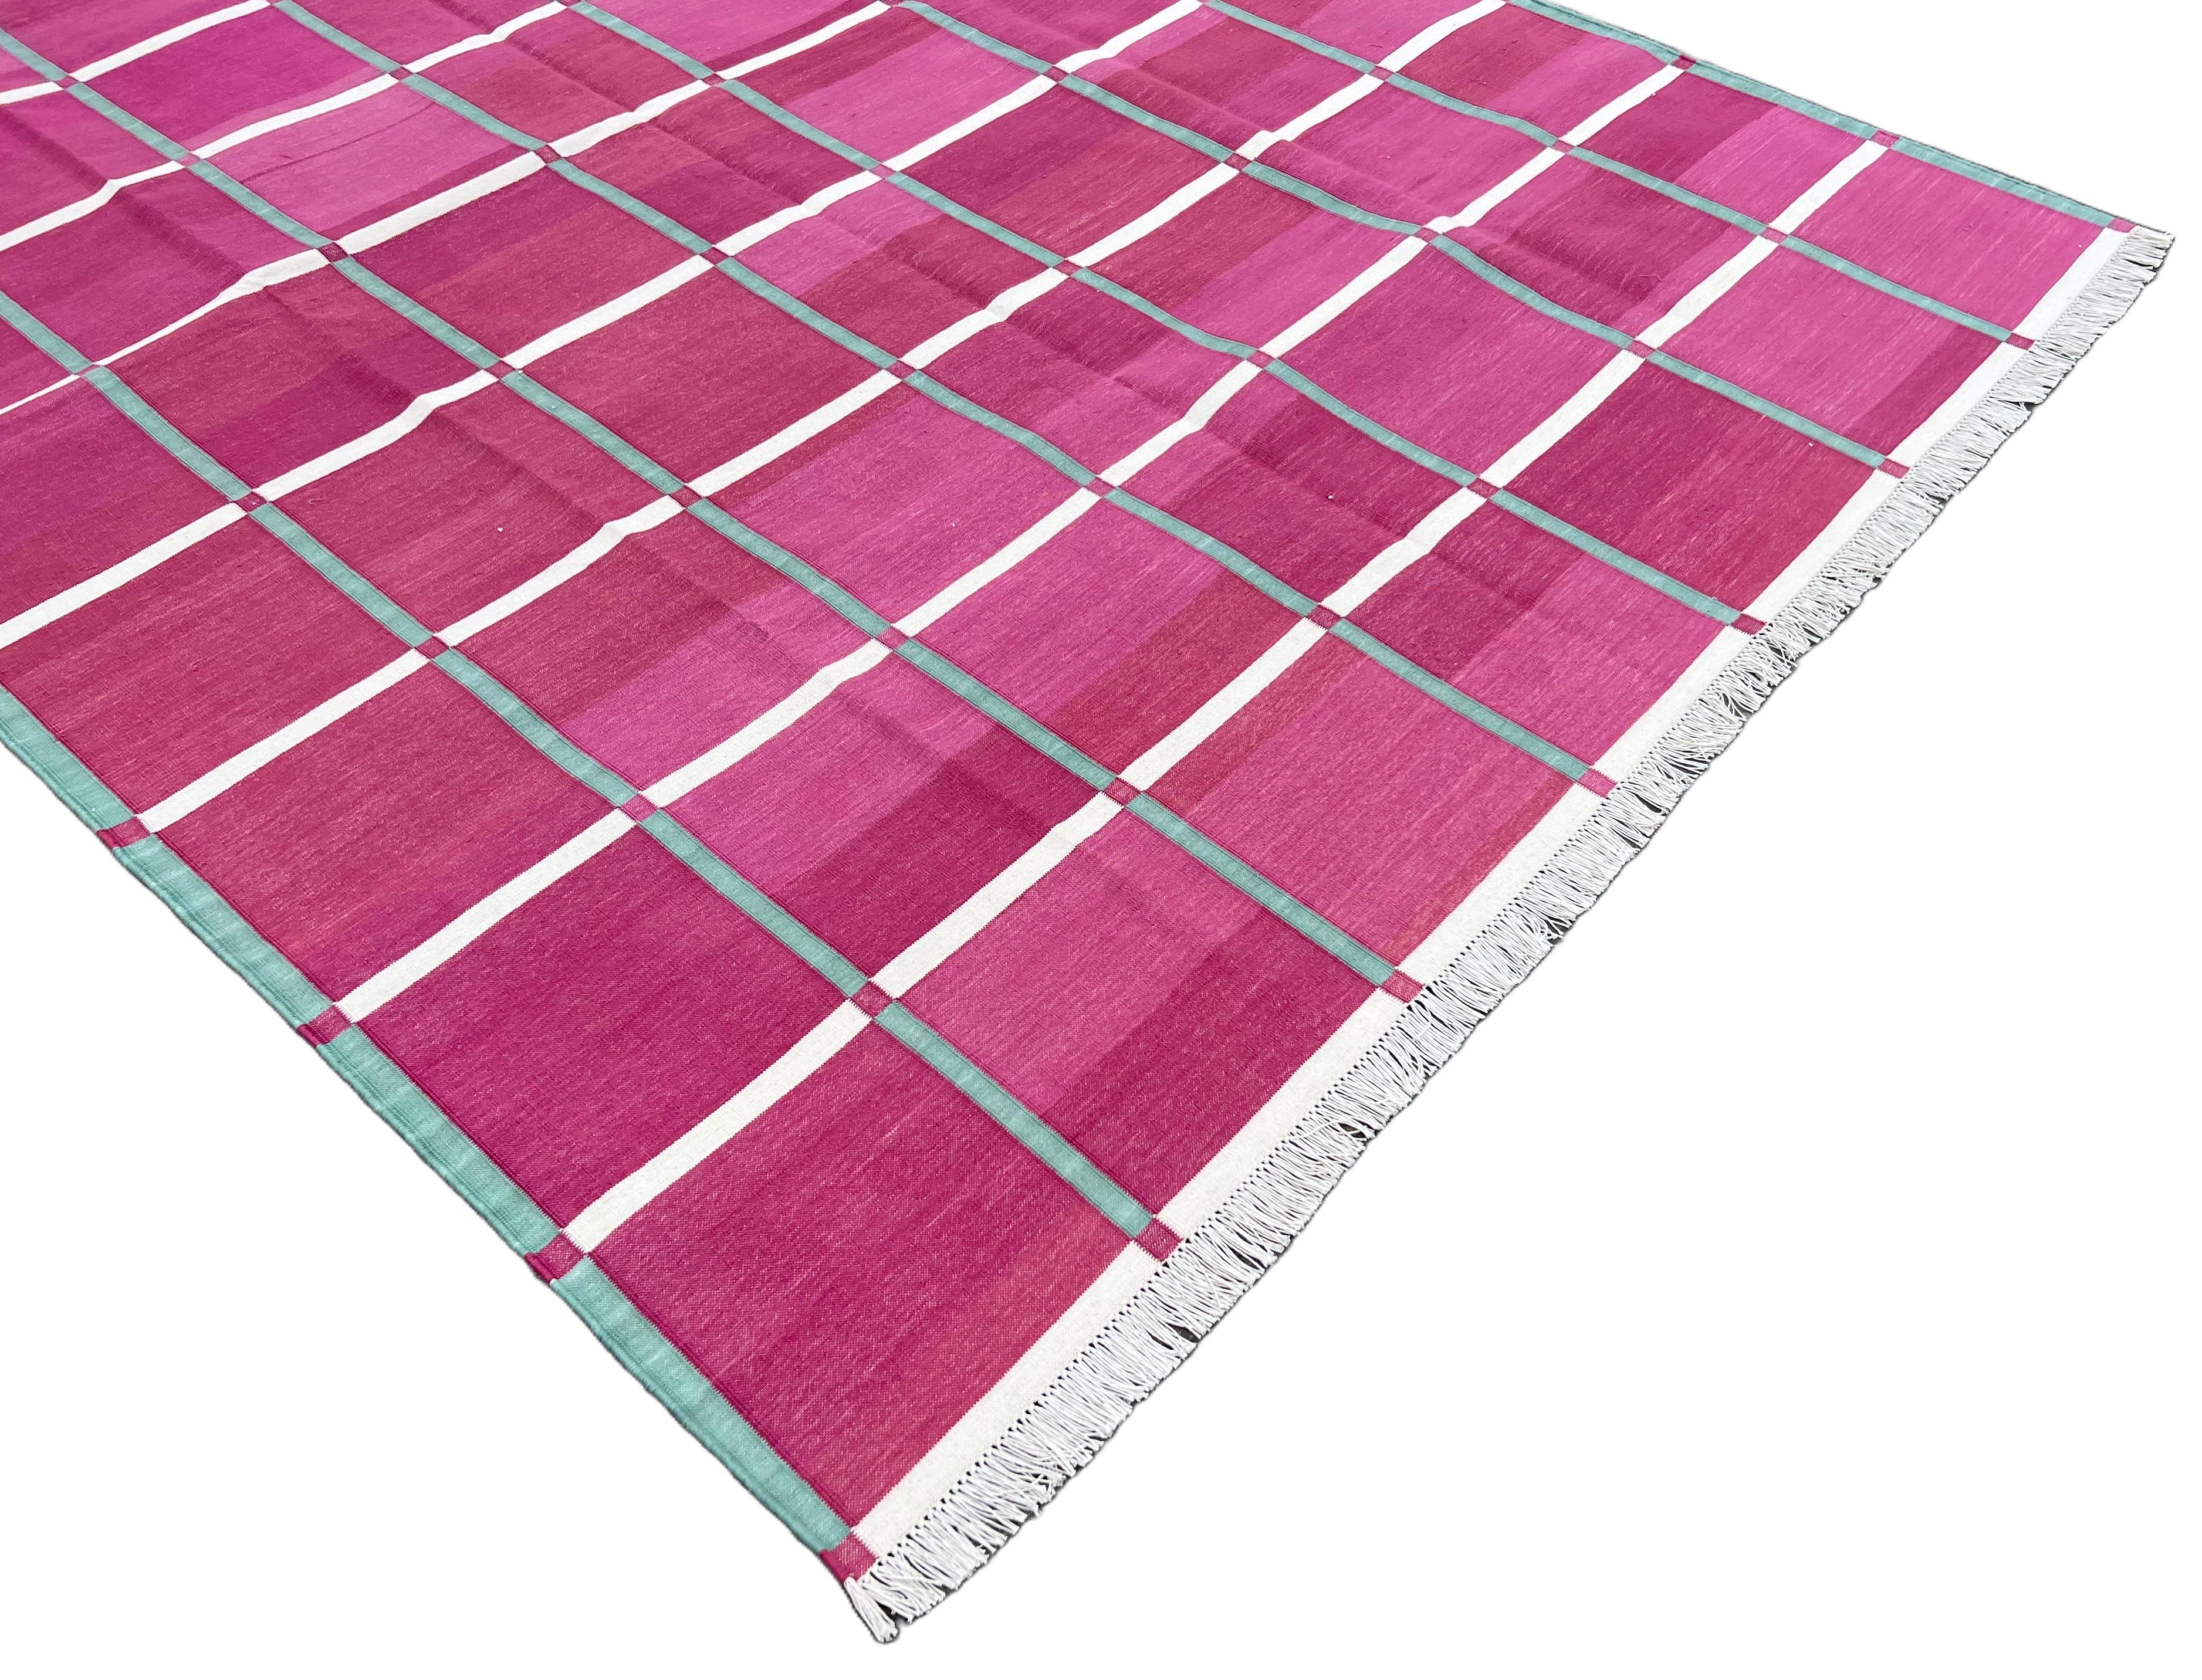 Contemporary Handmade Cotton Area Flat Weave Rug, Pink, Green Windowpane Check Indian Dhurrie For Sale